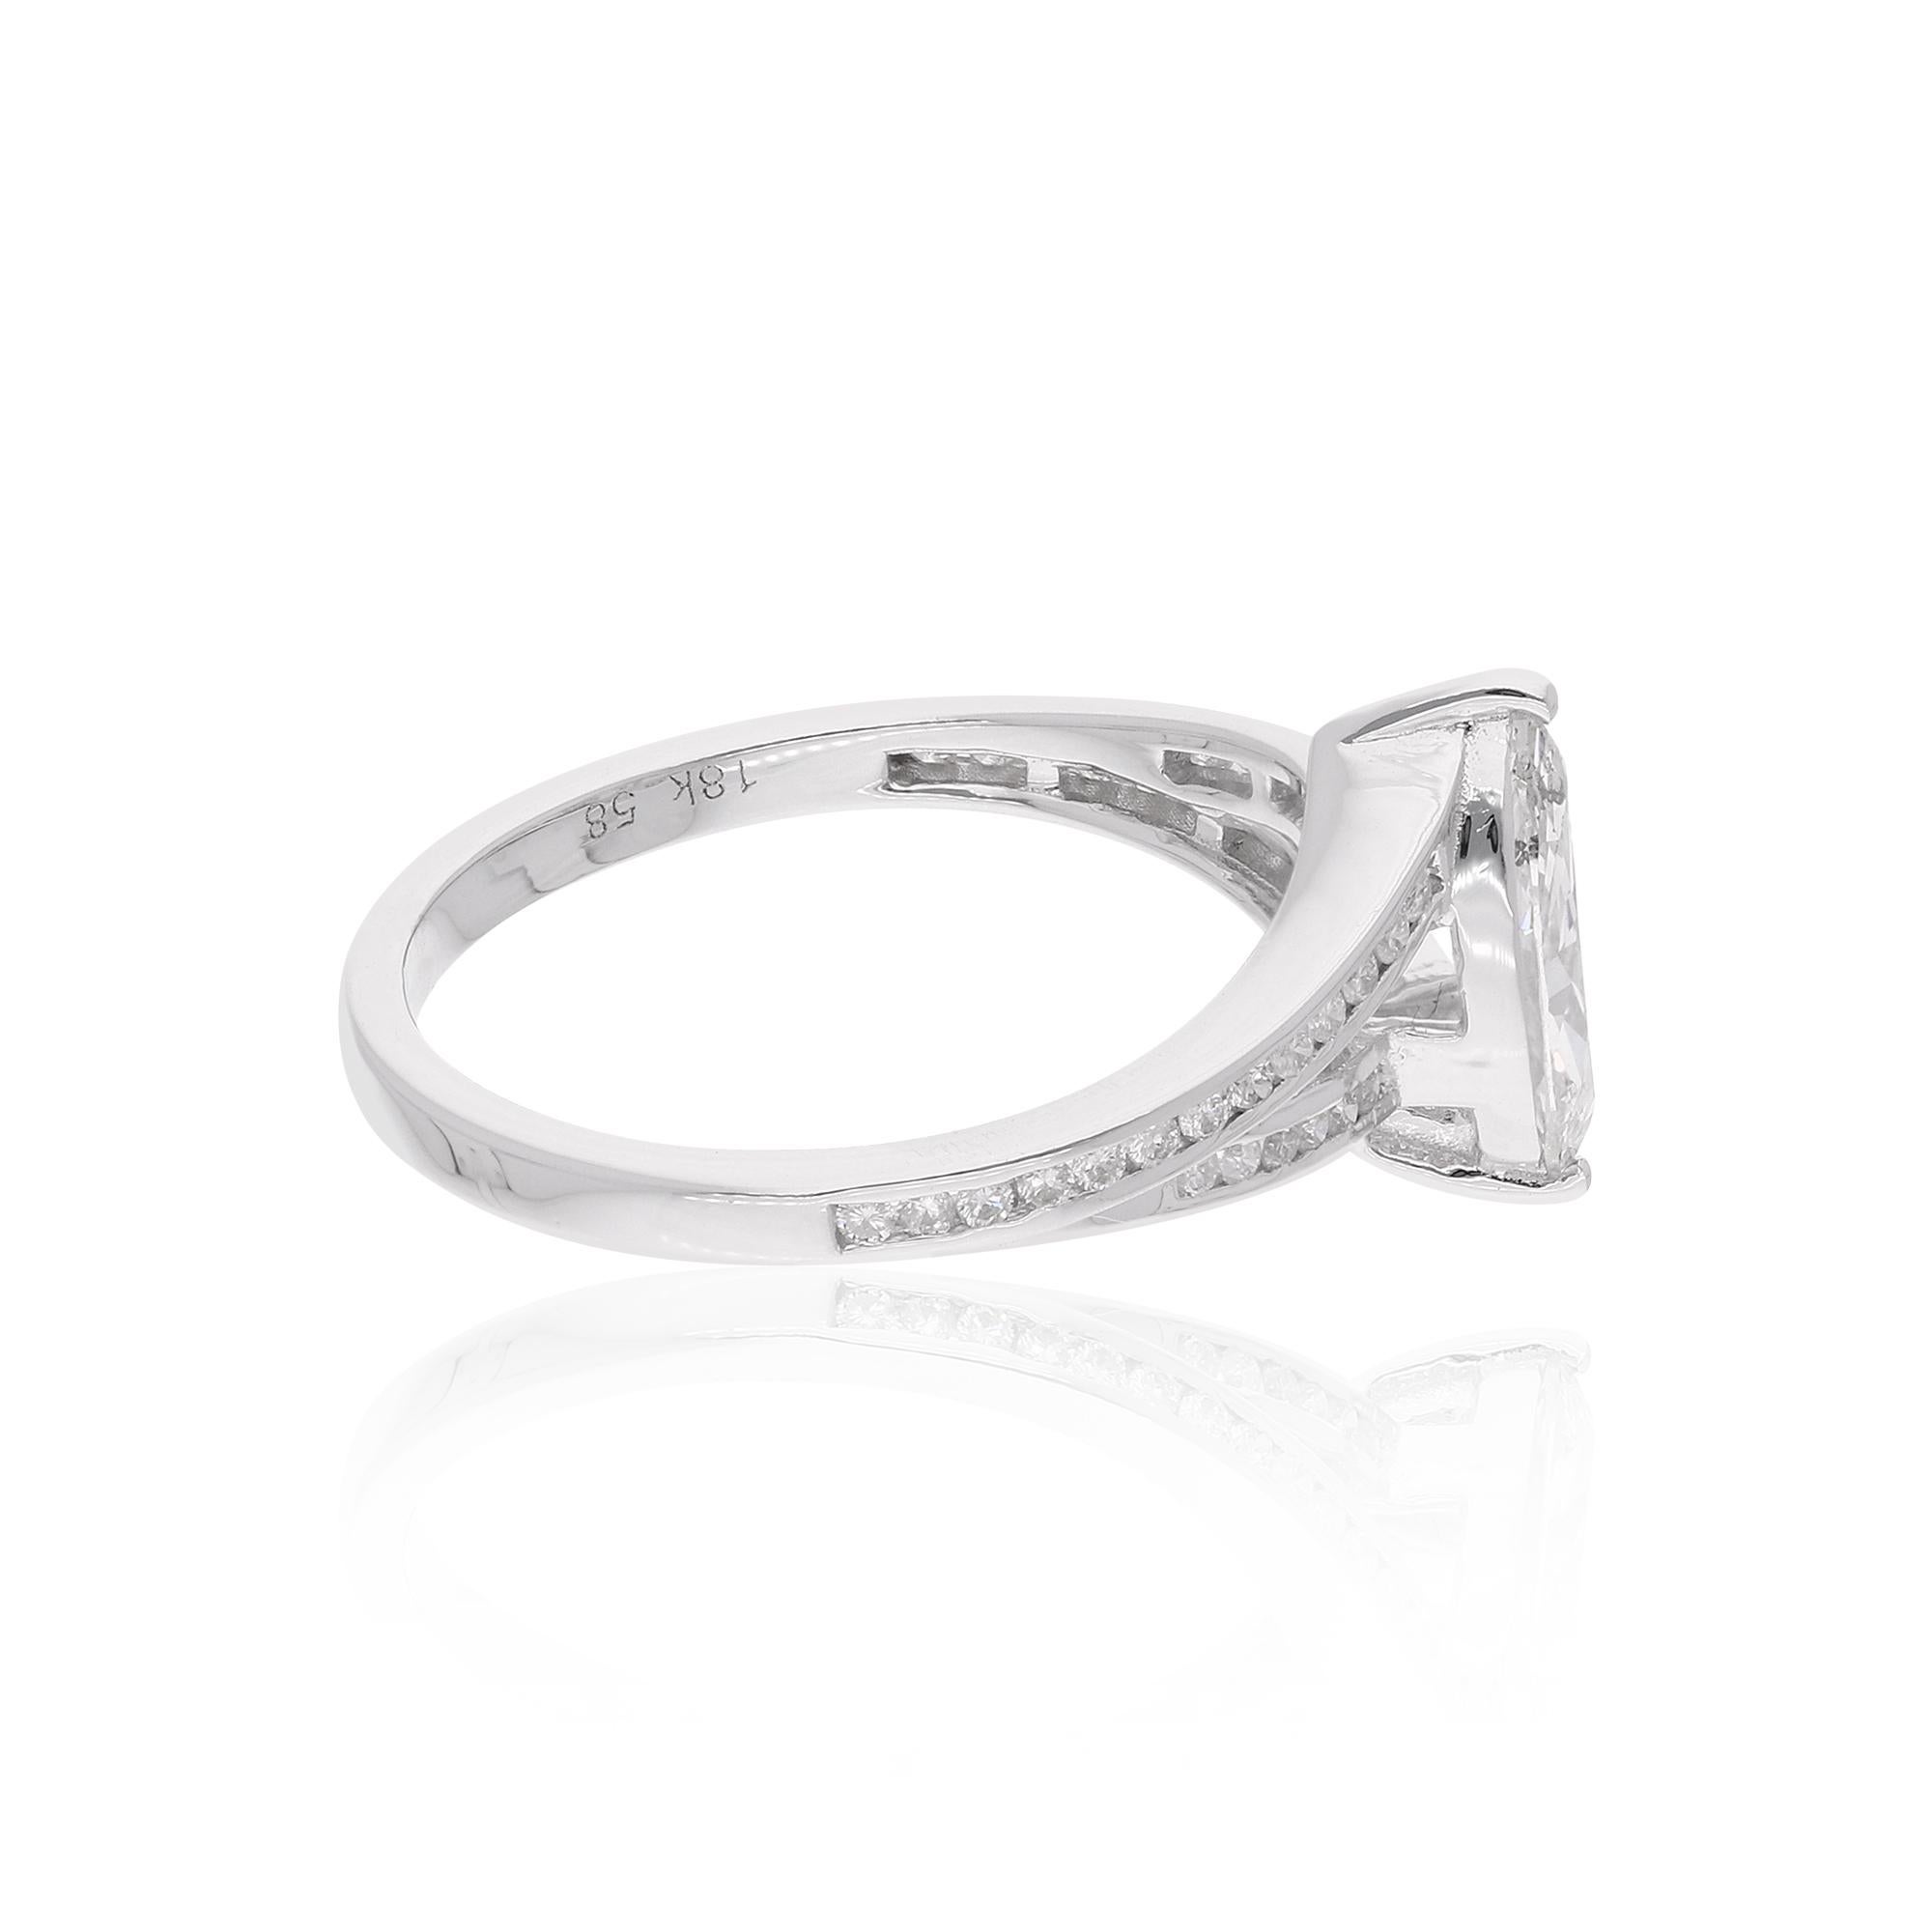 Simple and elegant, this 14k White Gold Diamond studded Ring will make your look fashionable and classy. Its classy shine and flawless finish enhances its majestic charm and makes it more adorable.

✧✧Welcome To Our Shop Spectrum